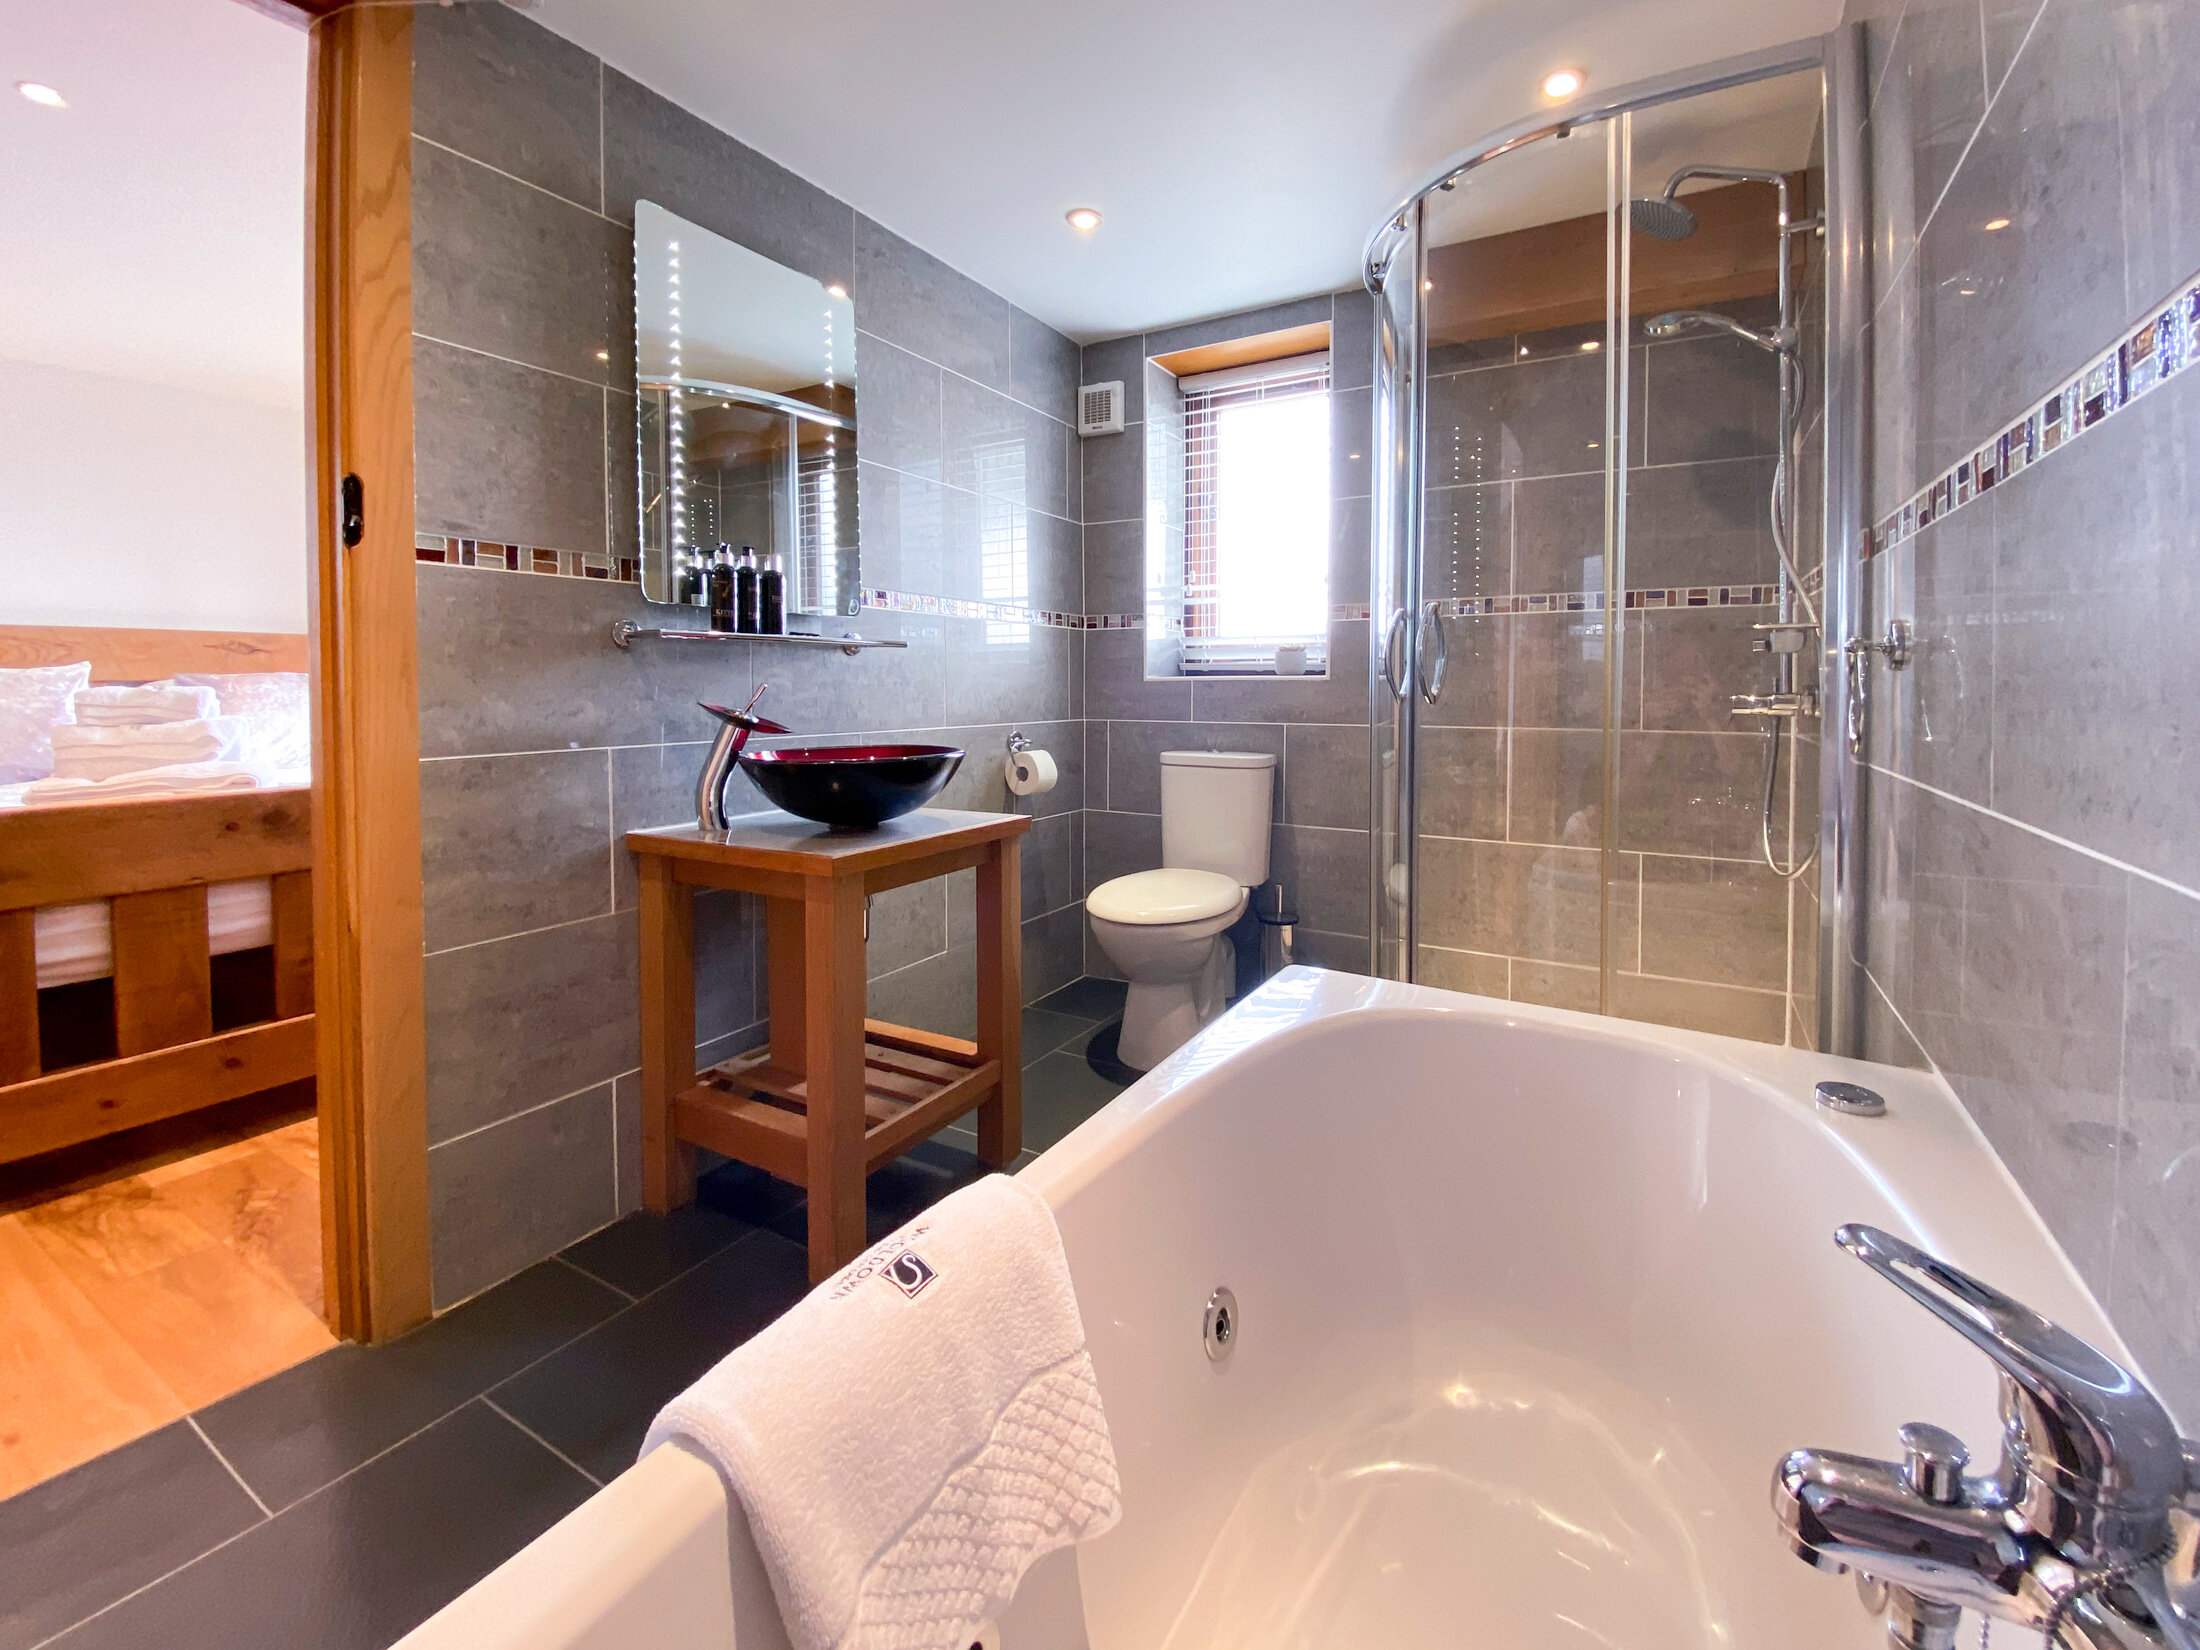 Spa bath and walk in shower in Pengenna Parlour accommodation